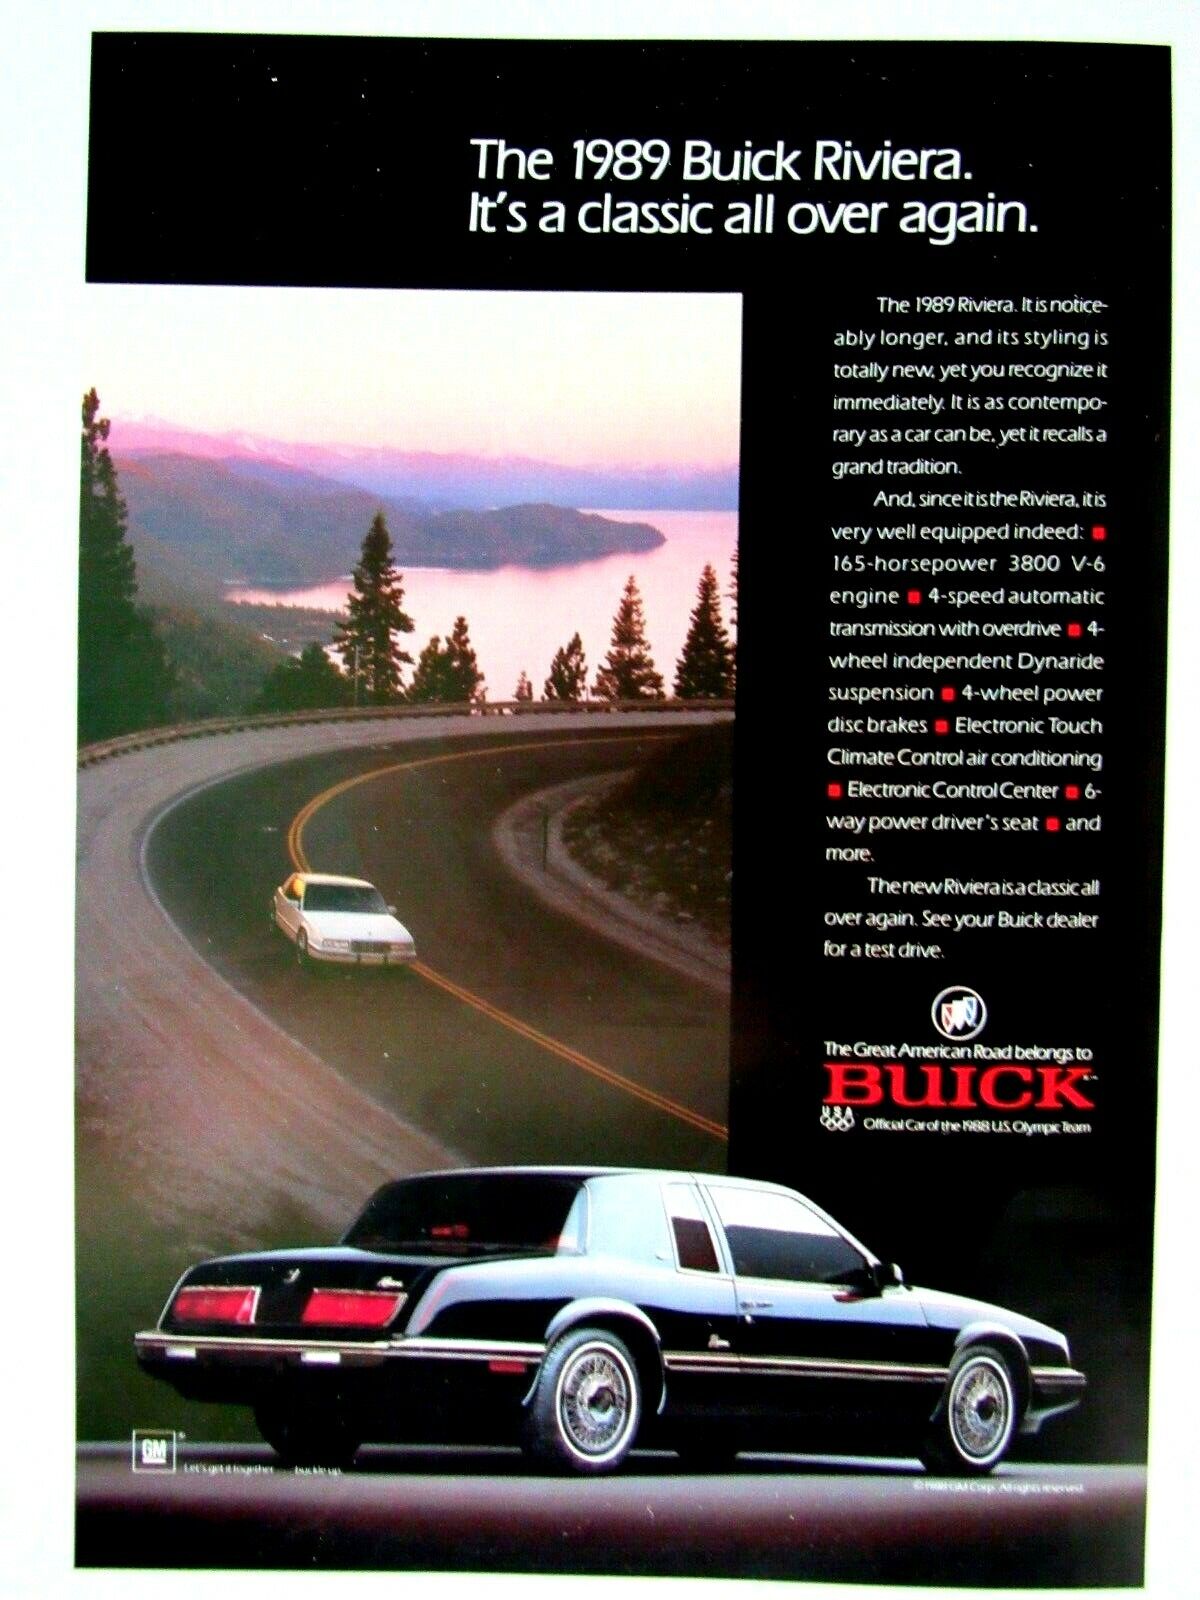 1989 Buick Riviera Vintage A Classic  ALL Over Again Original Print Ad 8.5 x 11